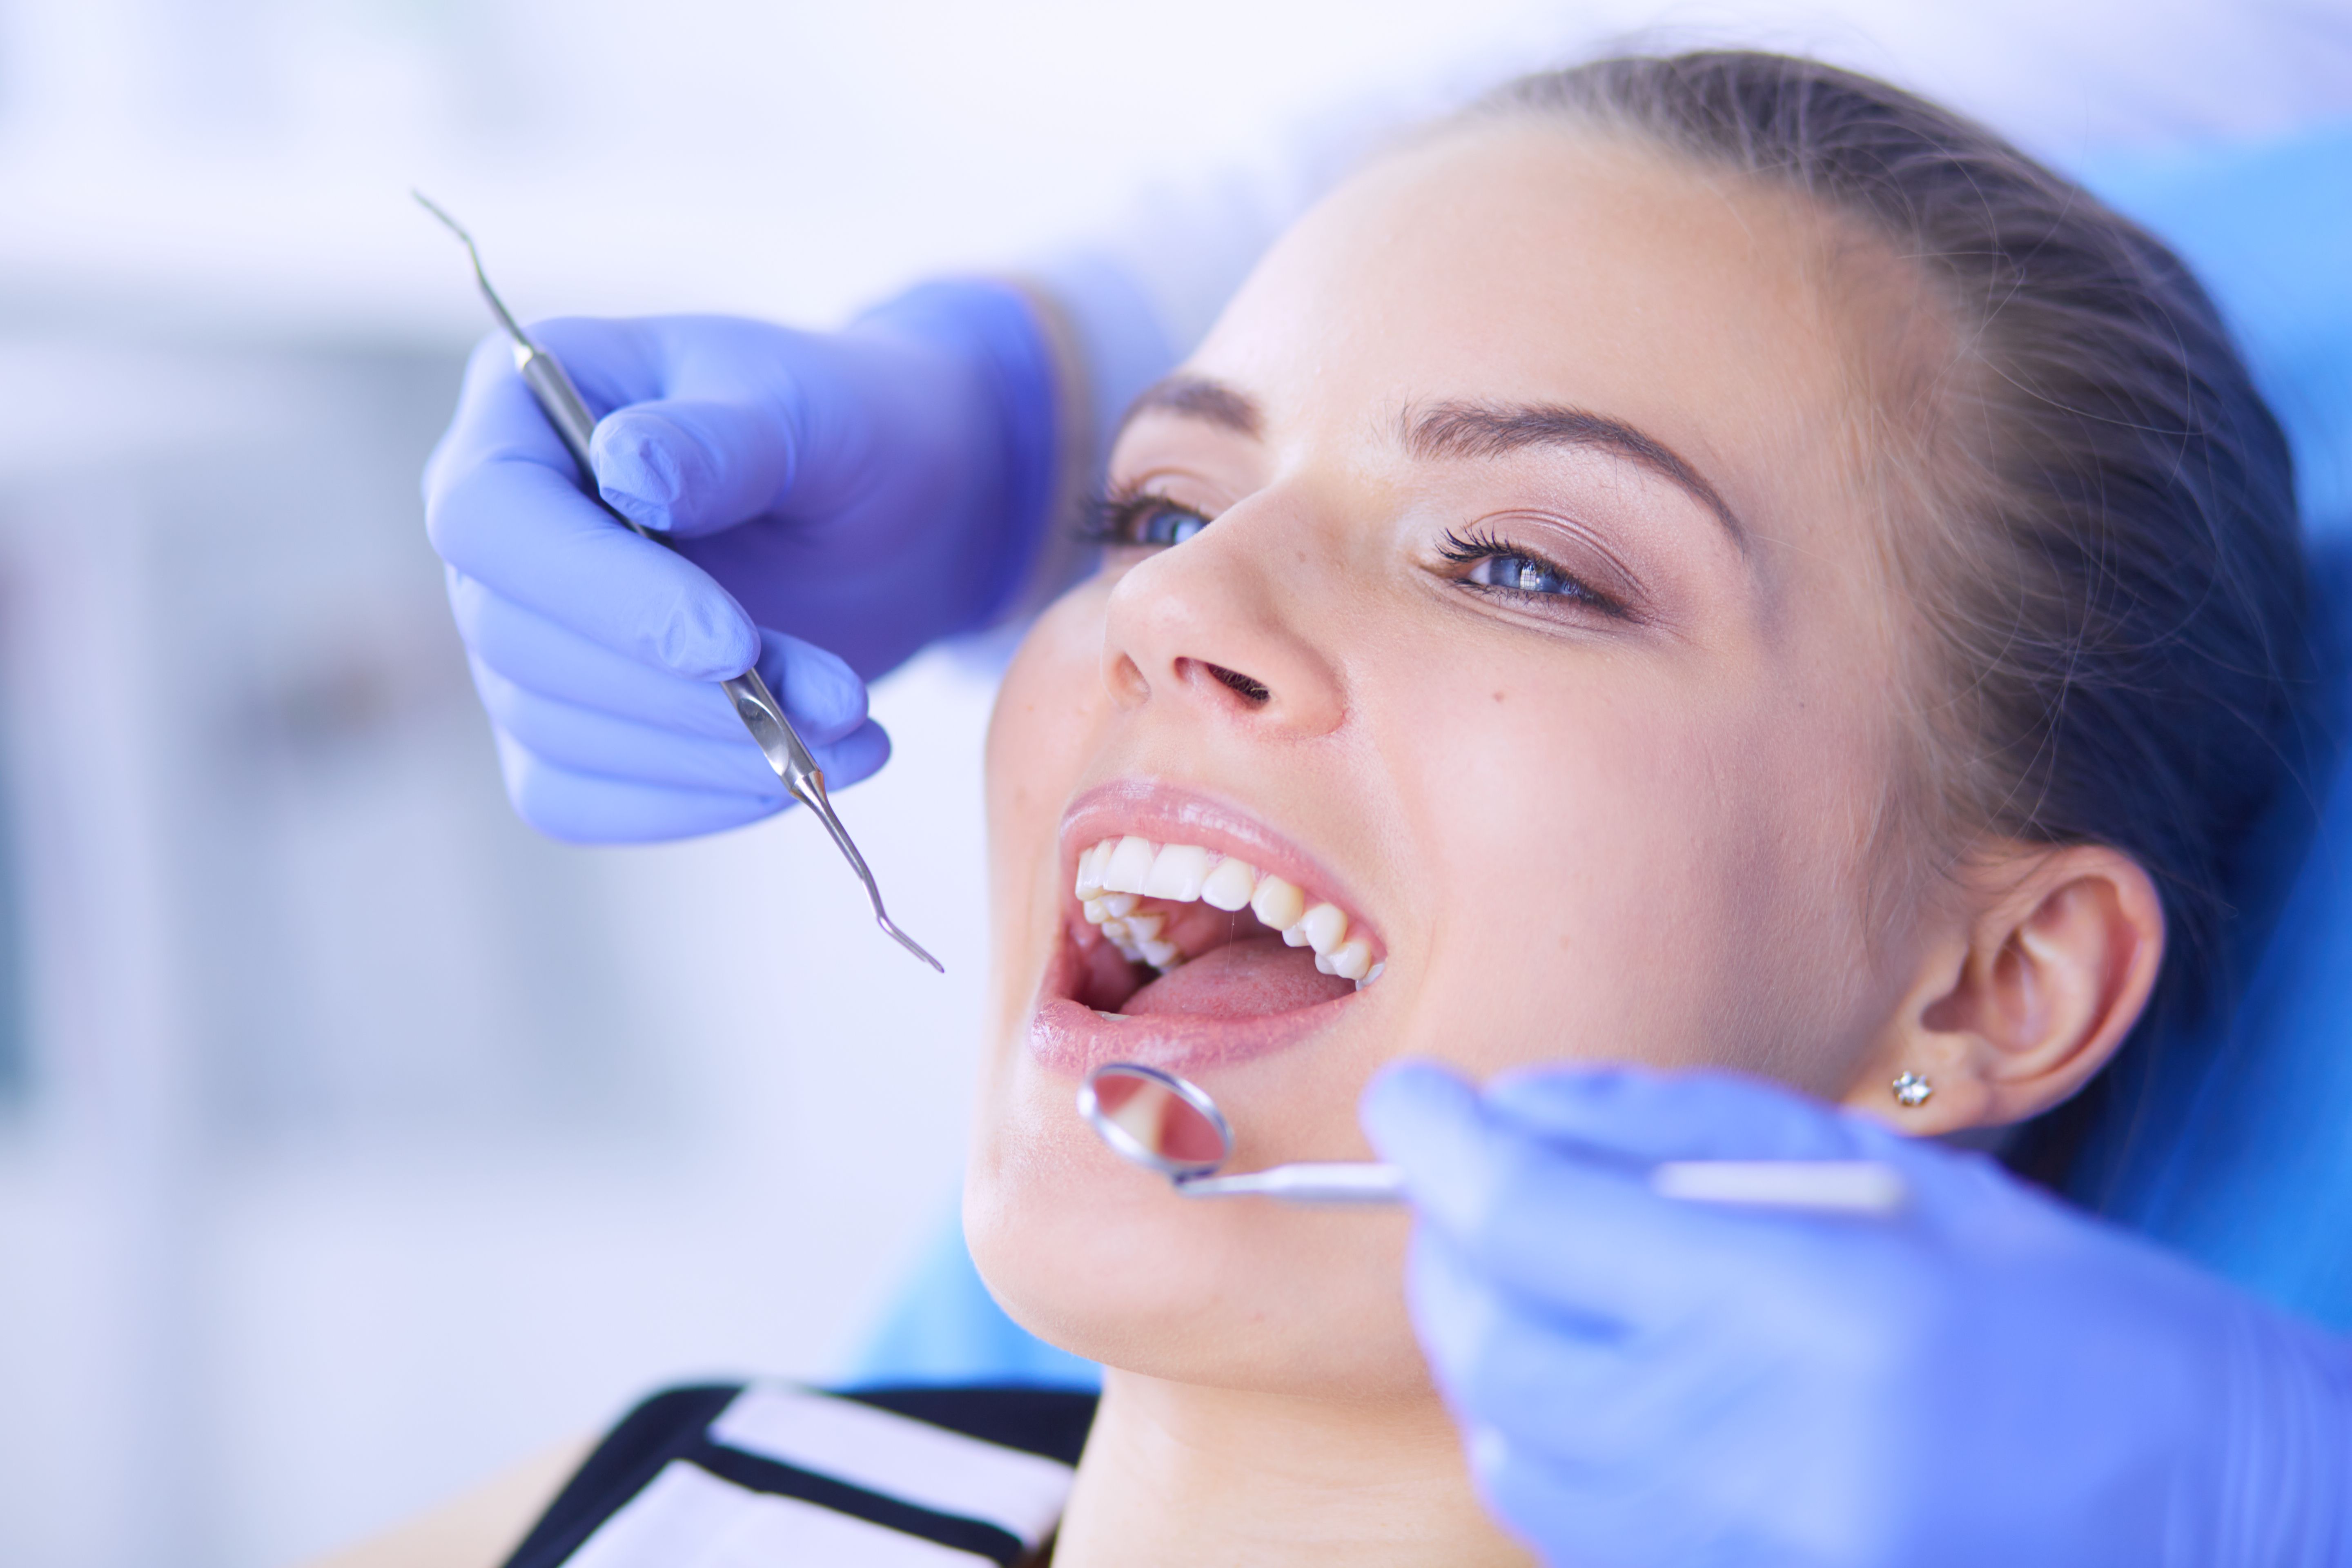 young-female-patient-with-open-mouth-examining-dental-inspection-dentist-office.jpg